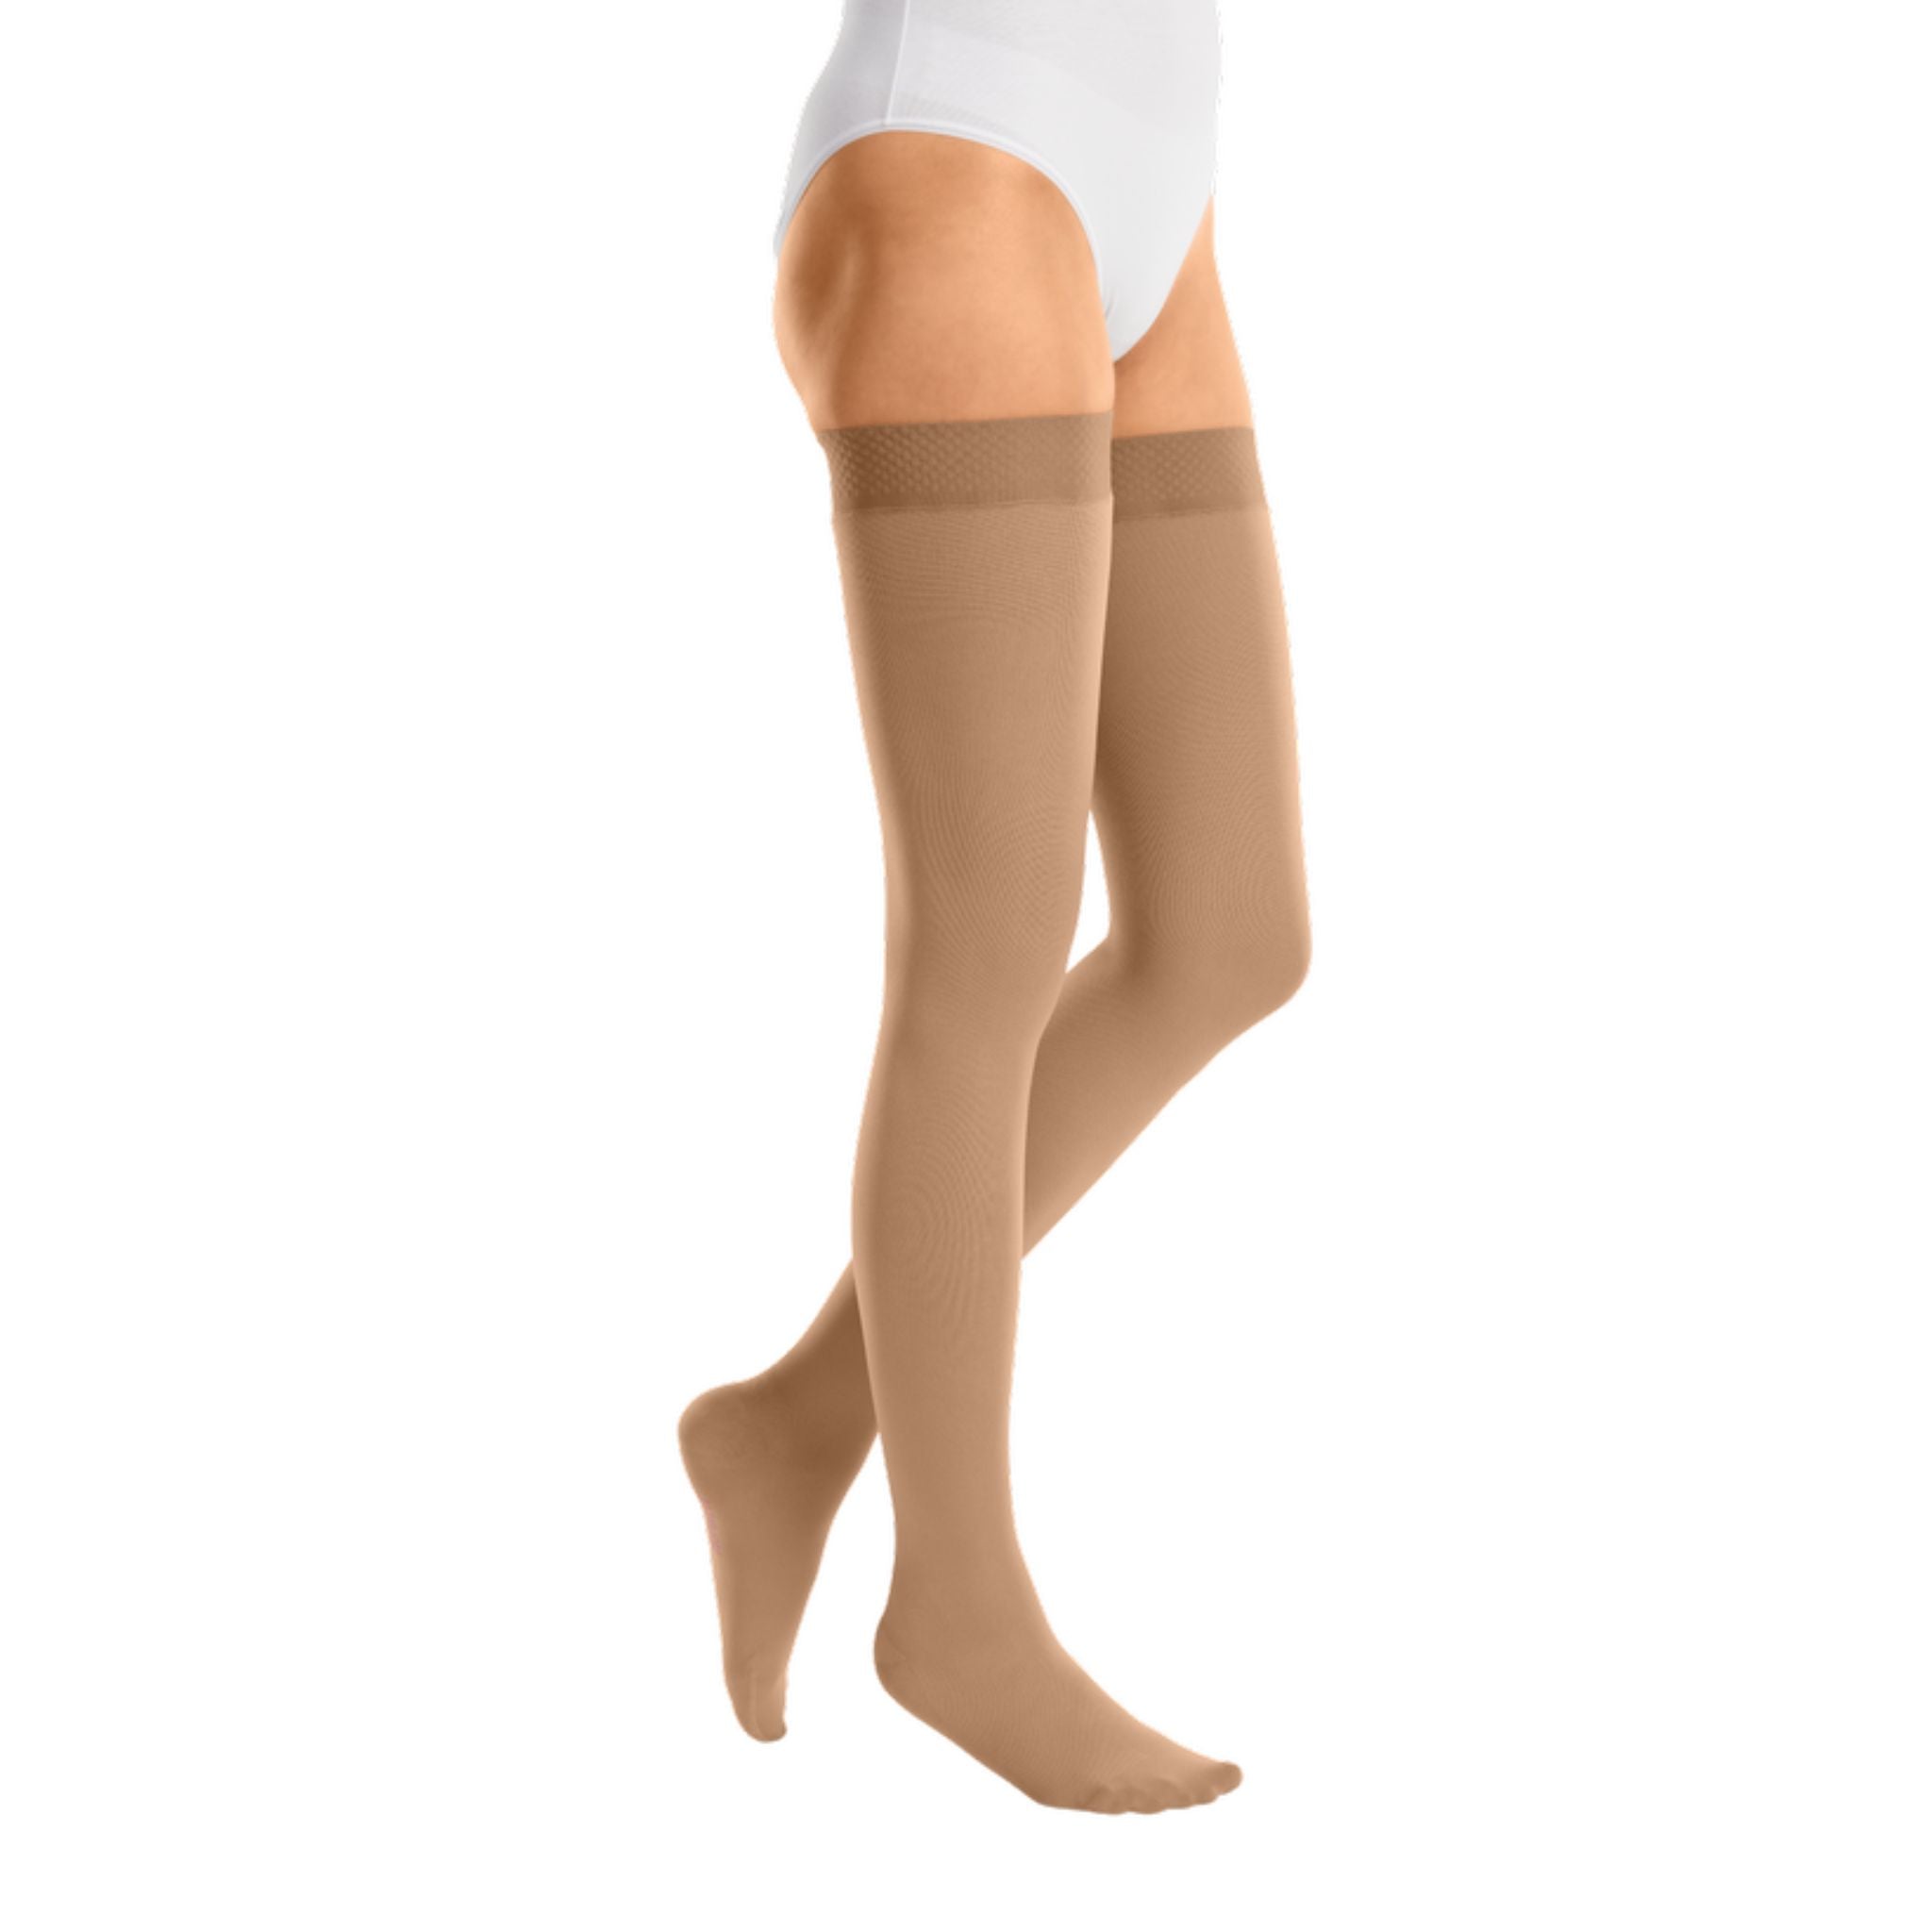 Compression Stockings  Thigh High  Sensitive Topband Wide  Open Toe  Caramel  mediven cotton